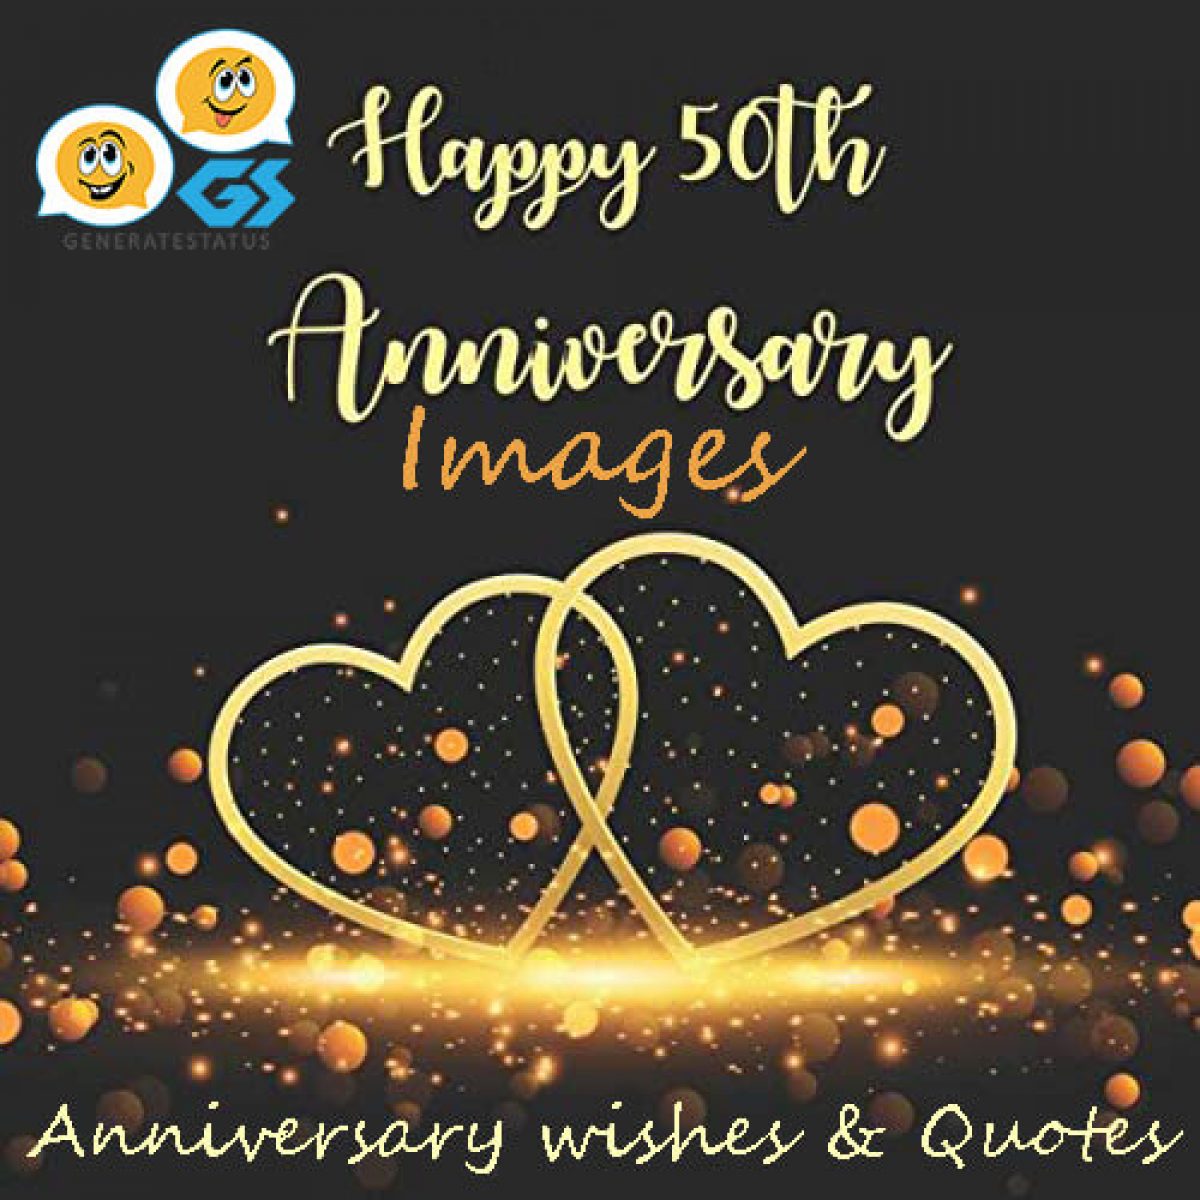 Happy 50th Anniversary Images - For Husband, Wife and Couples